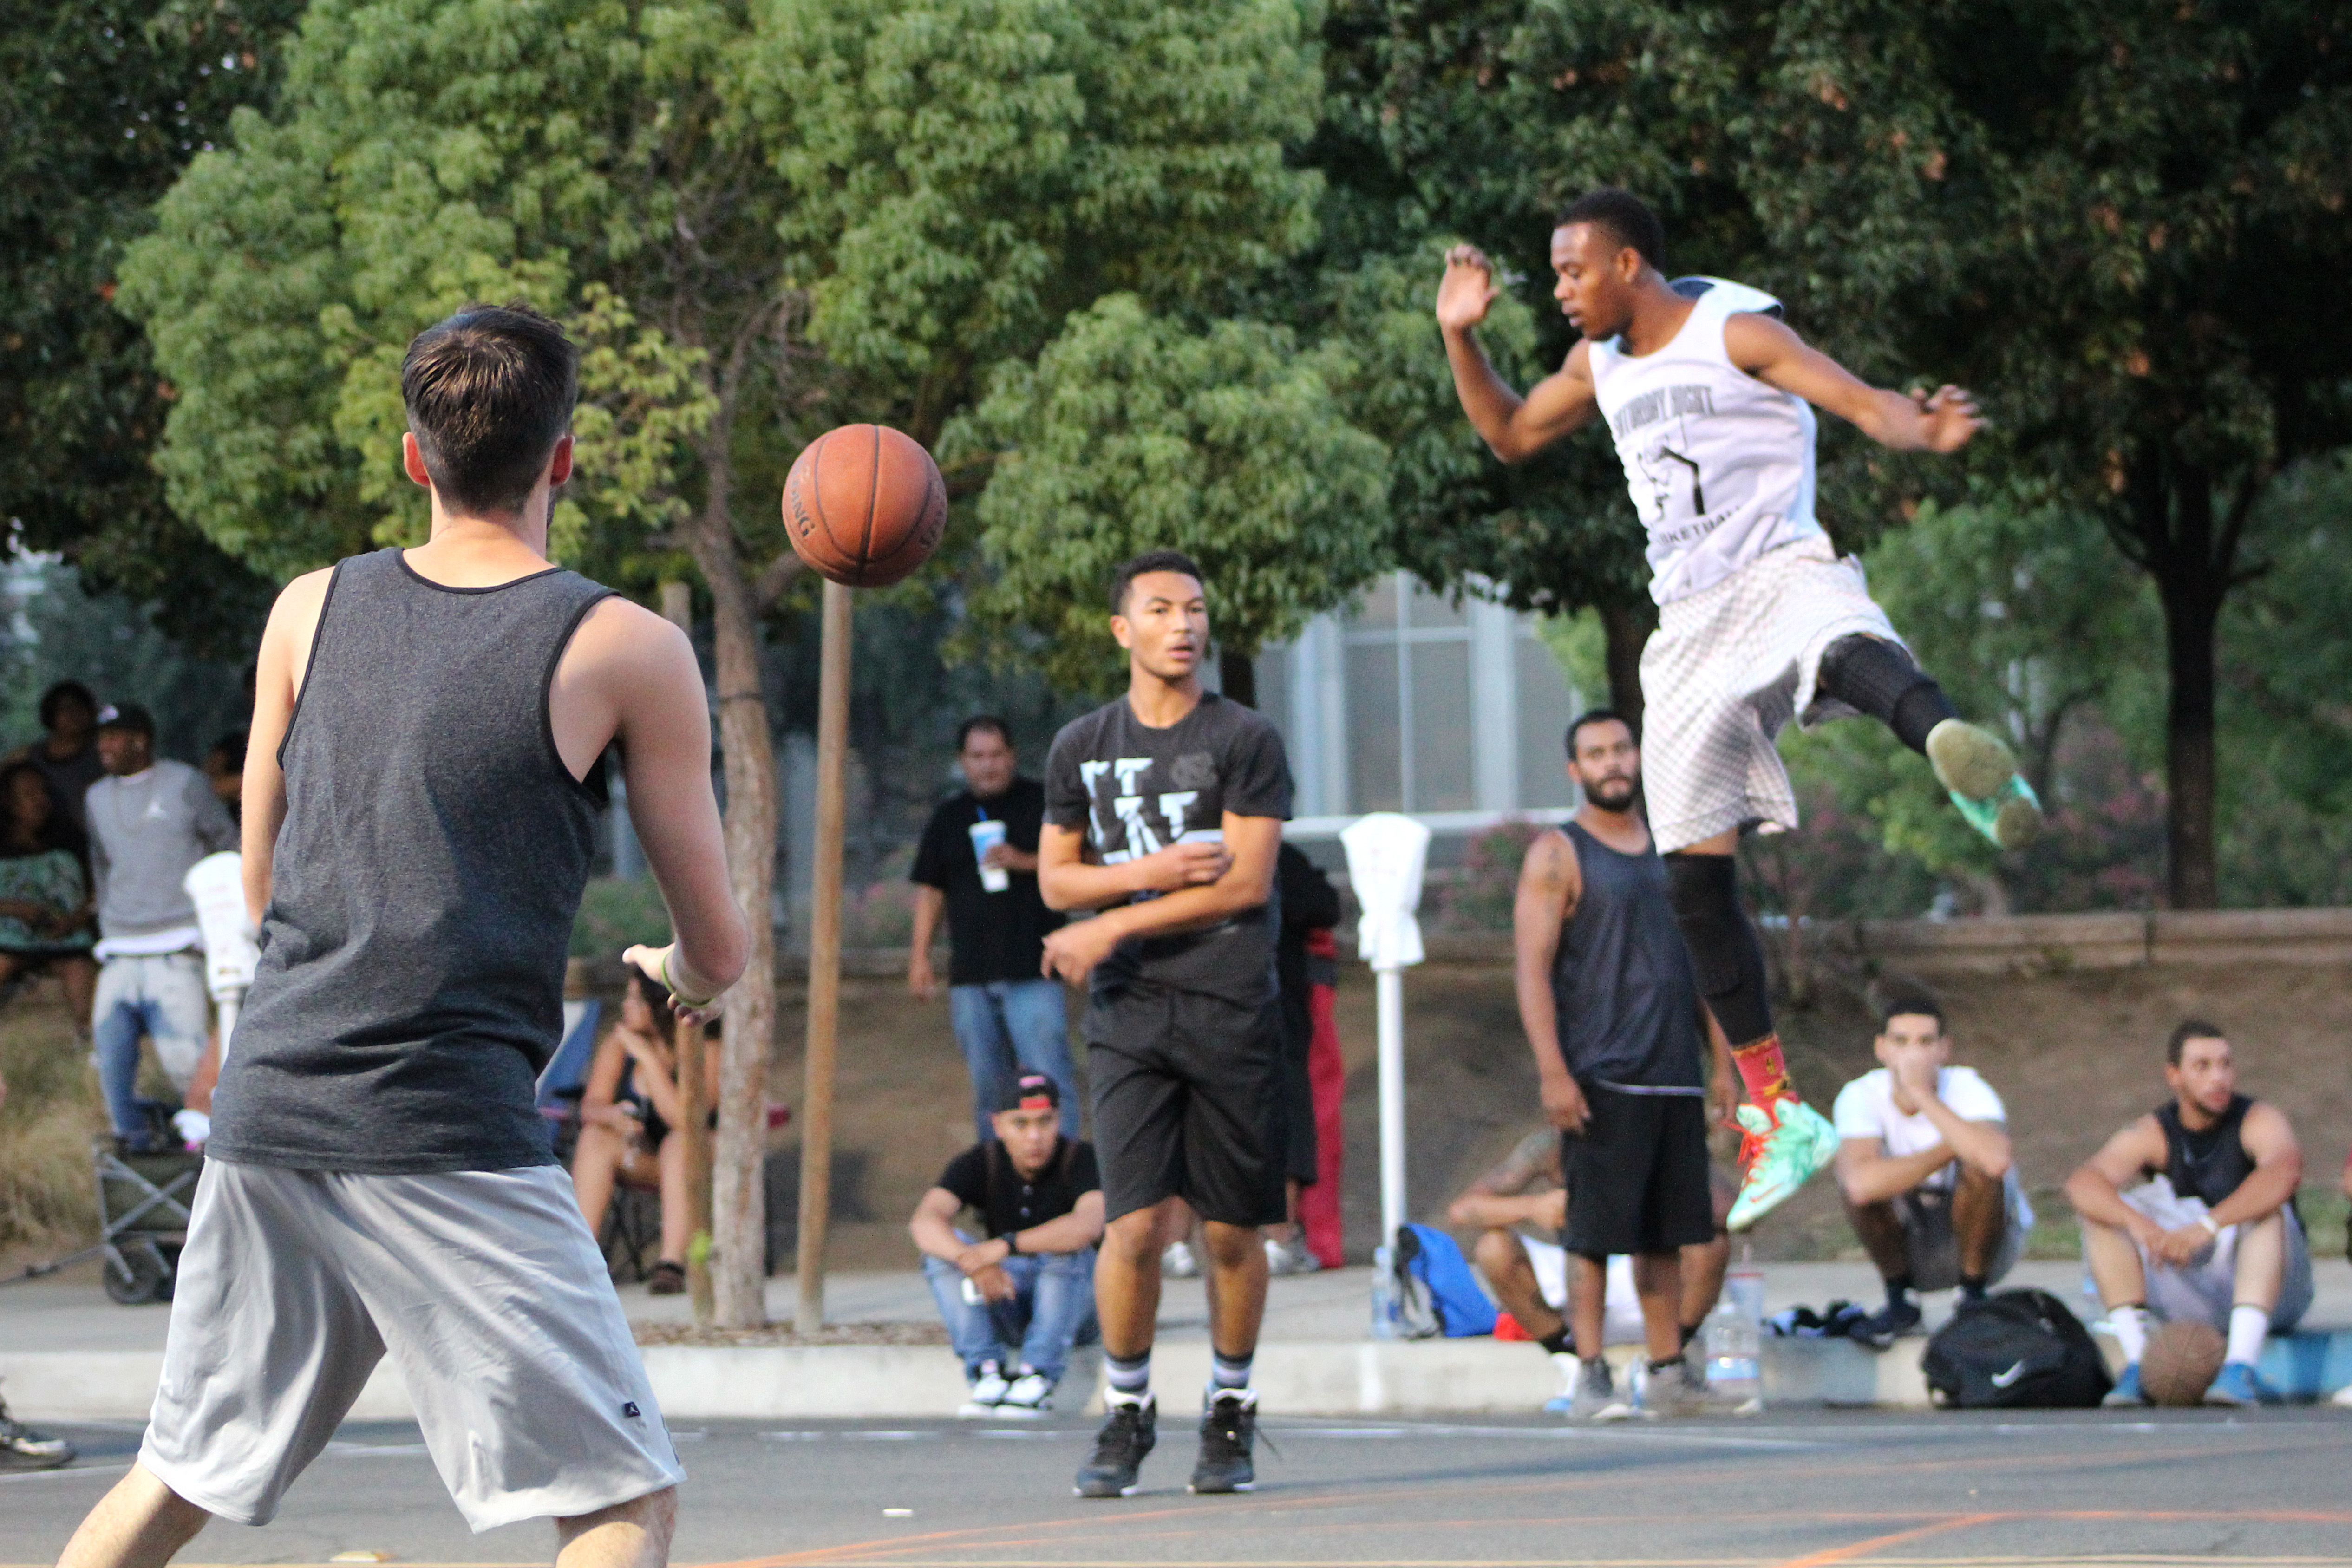 Teams battle it out on the last night of the summer basketball tournament.